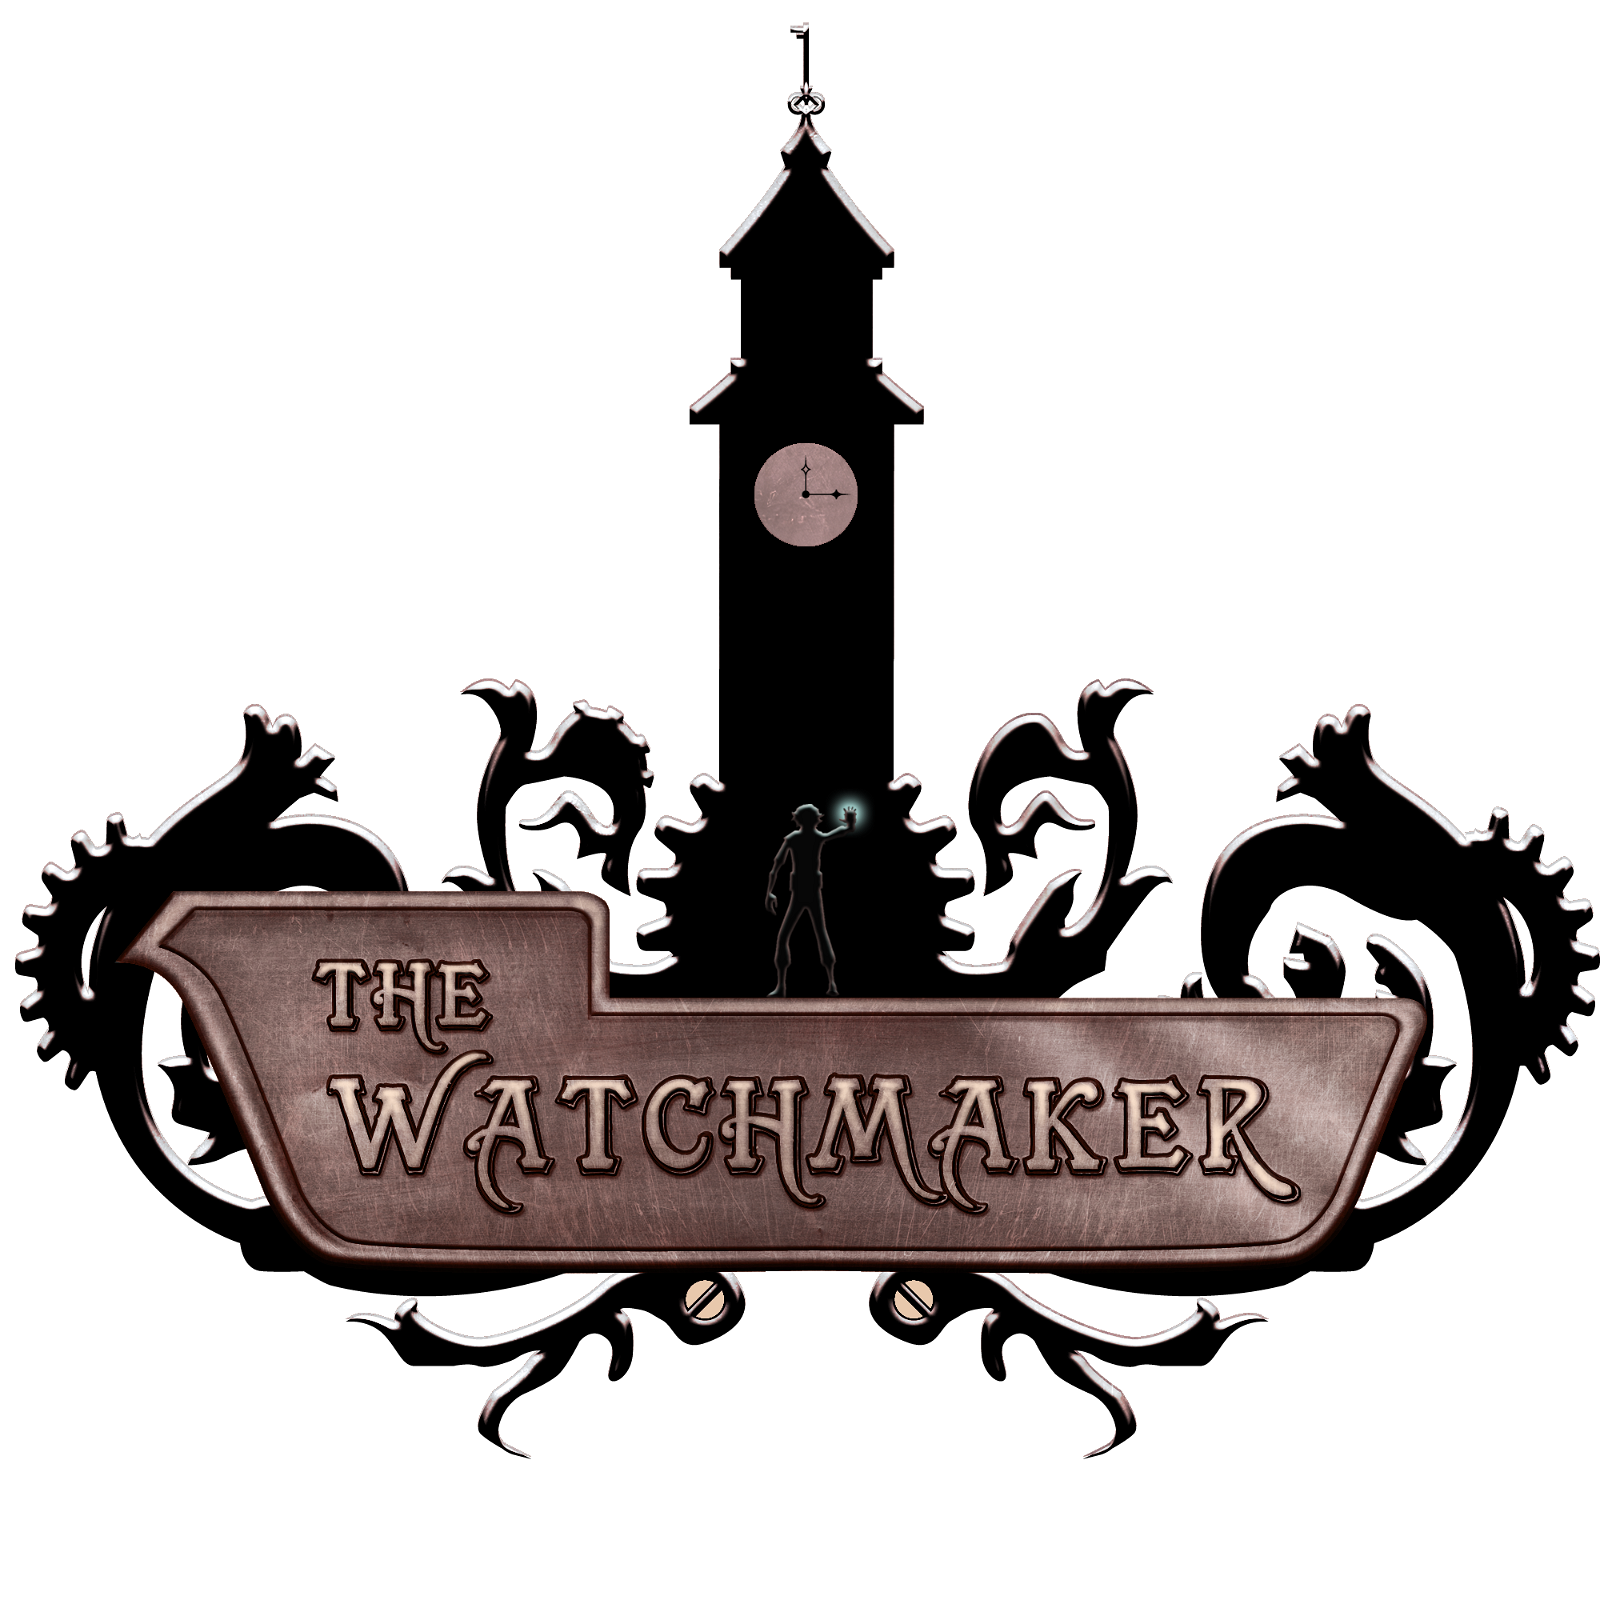 Image of The Watchmaker